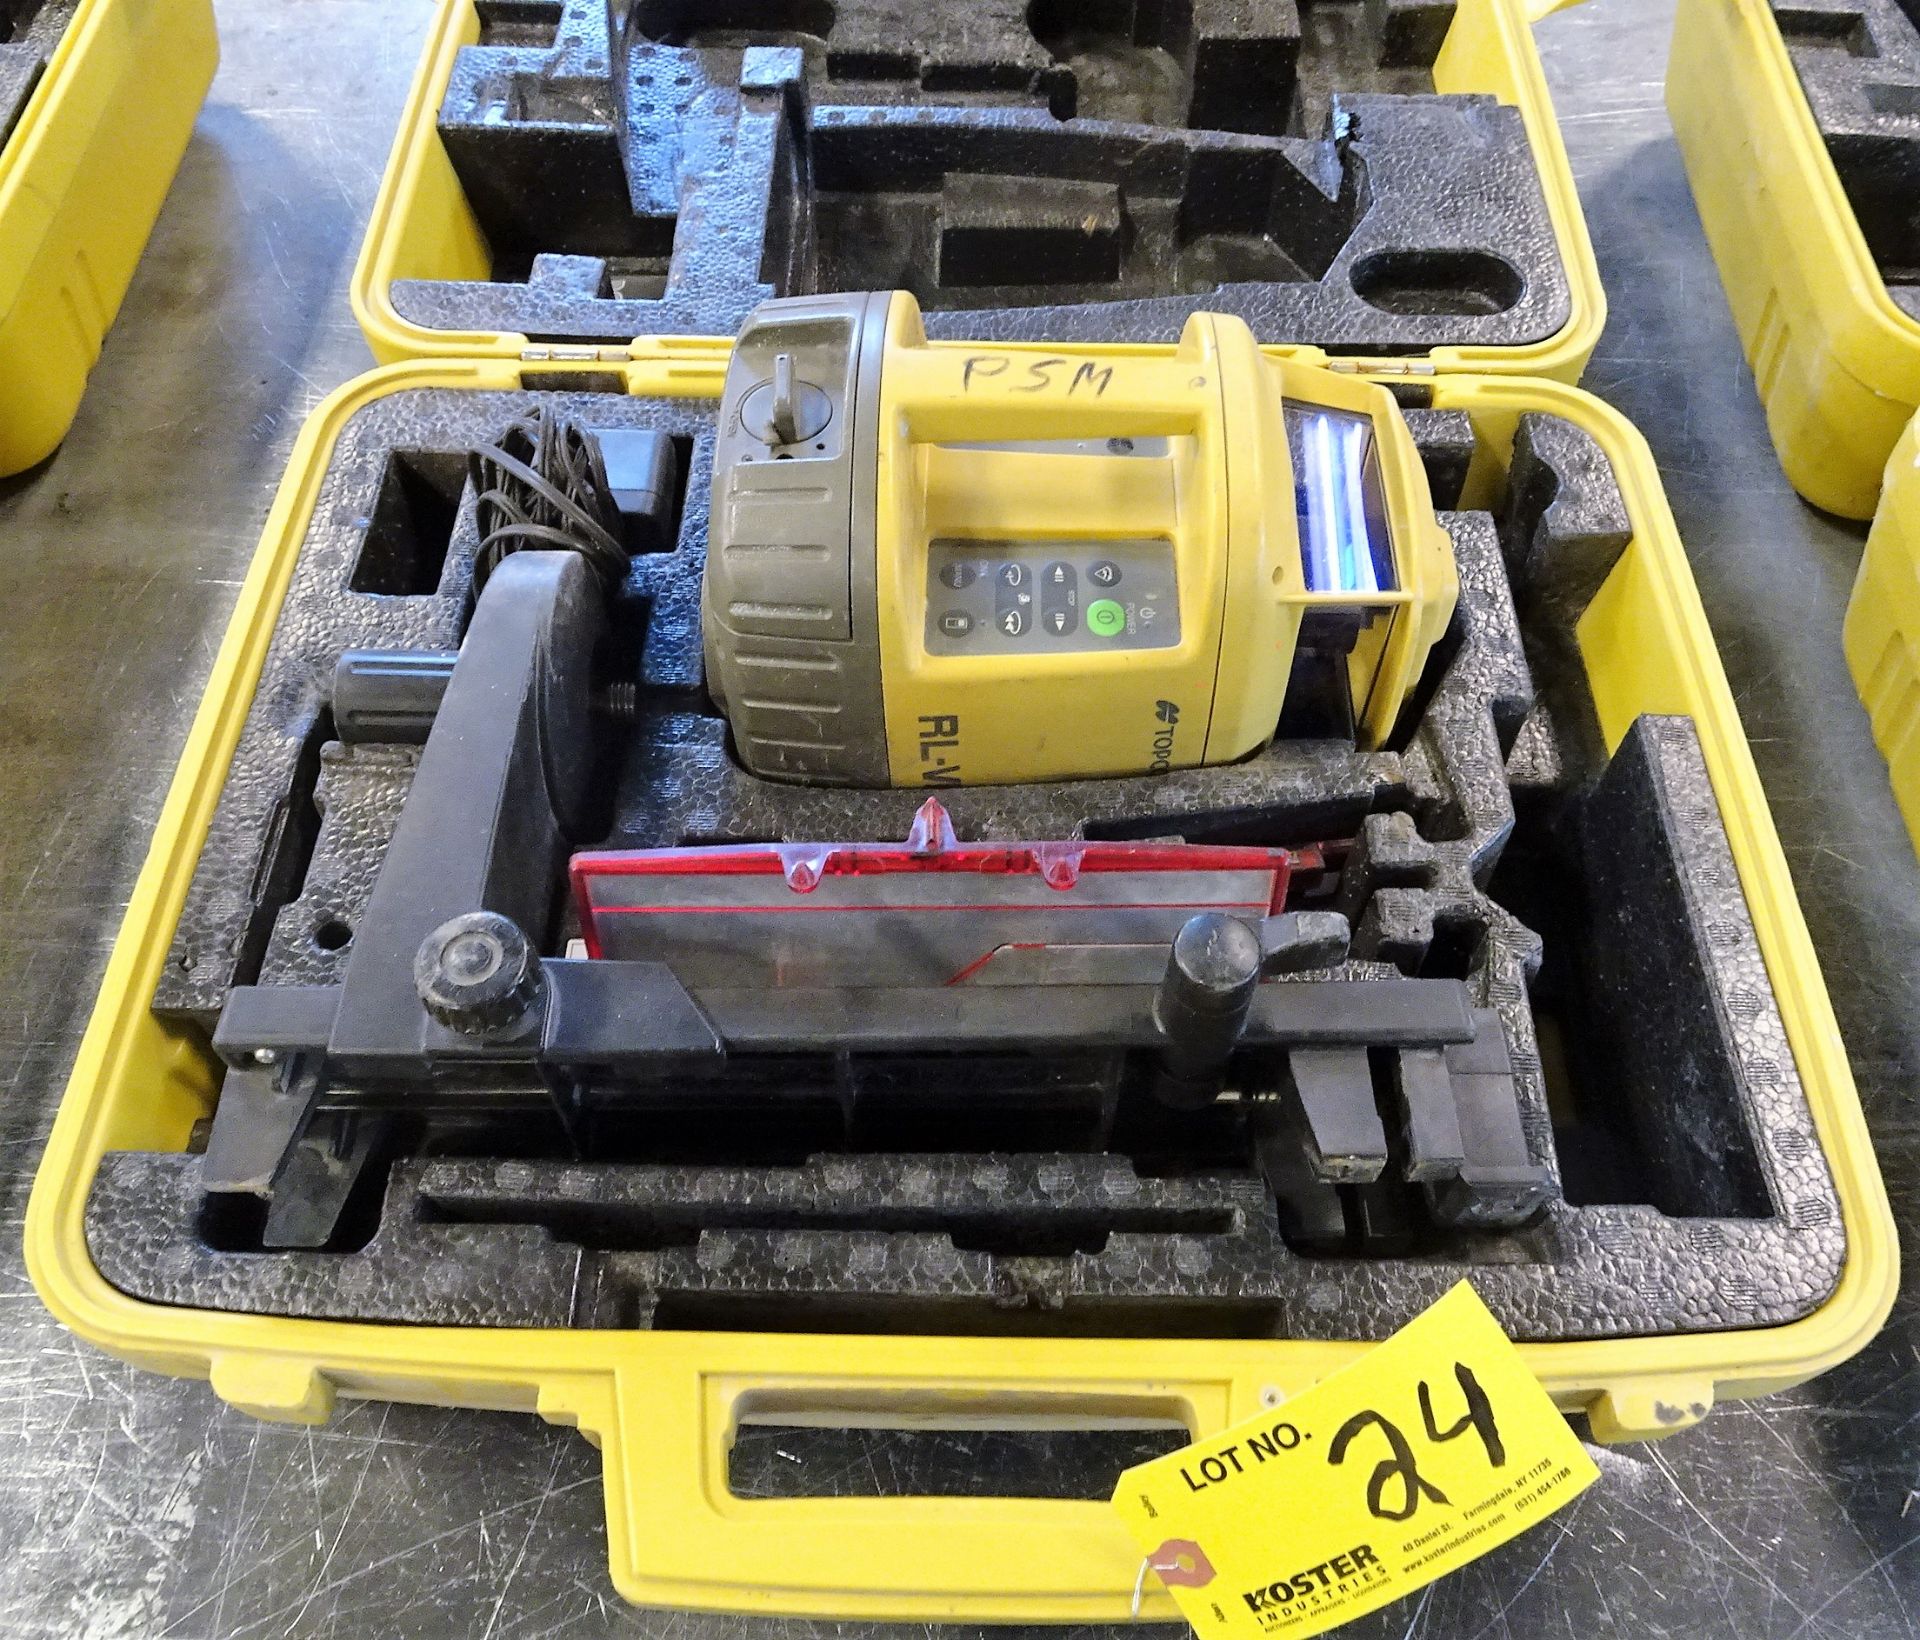 Topcon Mdl. RLVH3B Rotating Leveling Laser, with Associated Accessories and Case